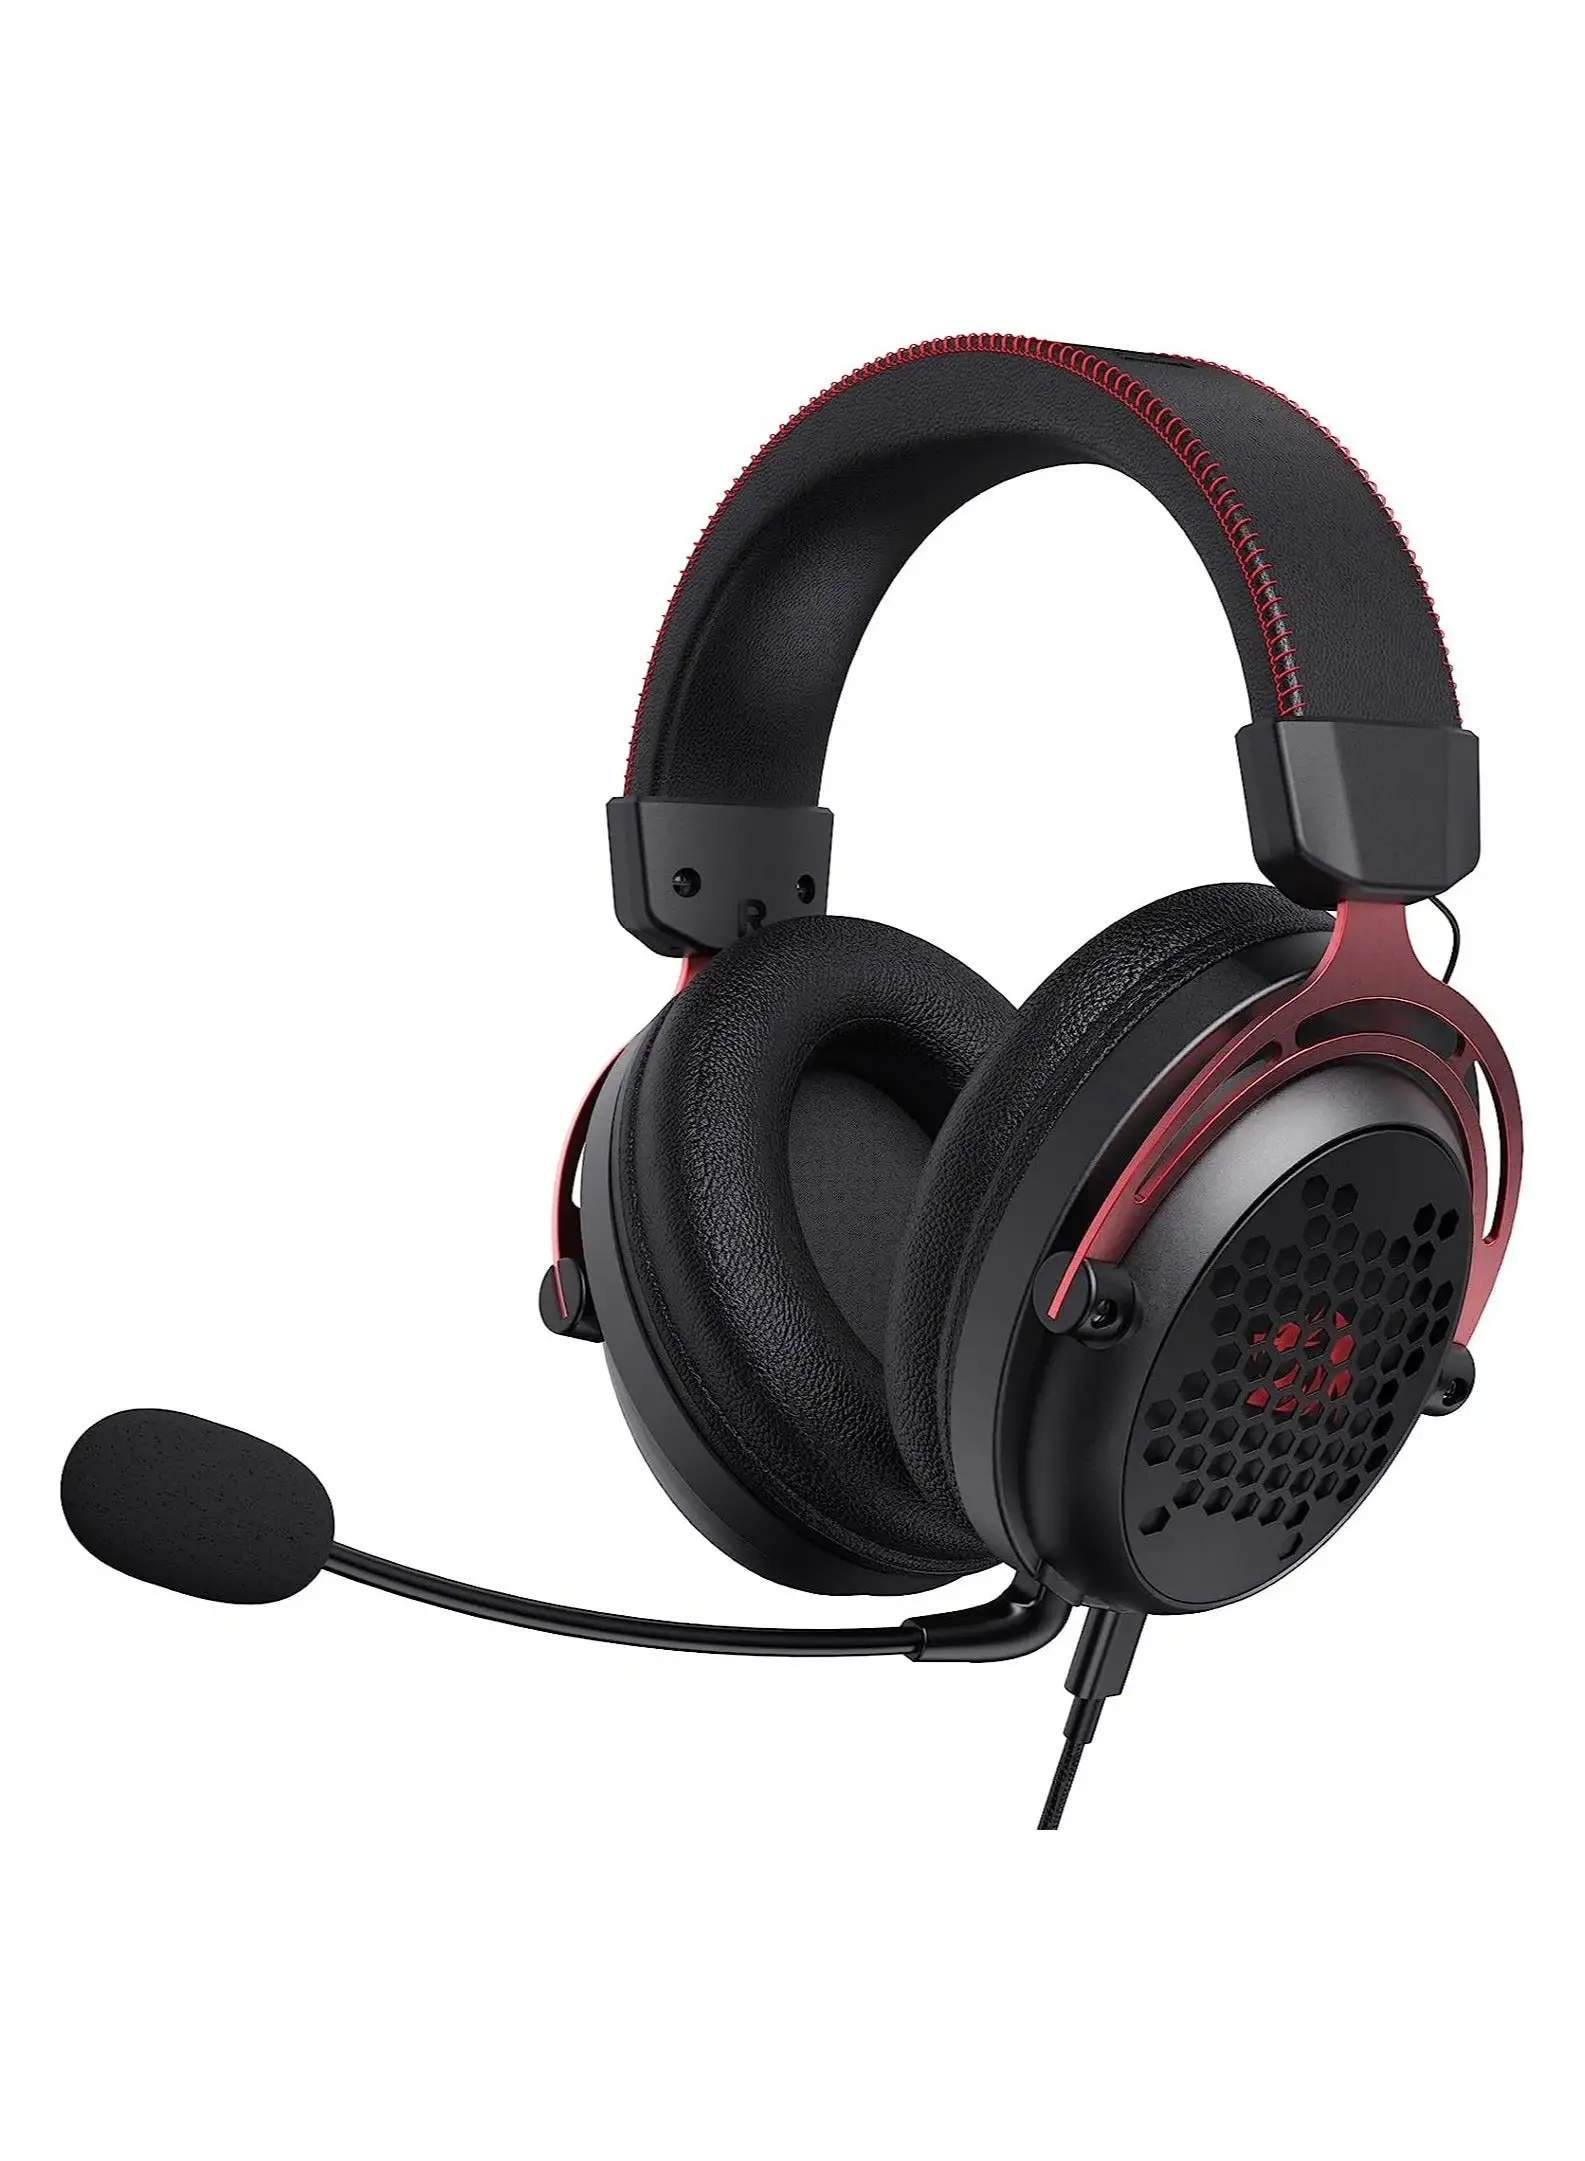 REDRAGON Diomedes Wired Gaming Headset H386 - 7.1 Surround Sound - 53MM Drivers - Detachable Microphone - Multi Platforms Headphone - USB/AUX 3.5mm Compatible with PC, PS4/3 & Xbox One/Series X, NS